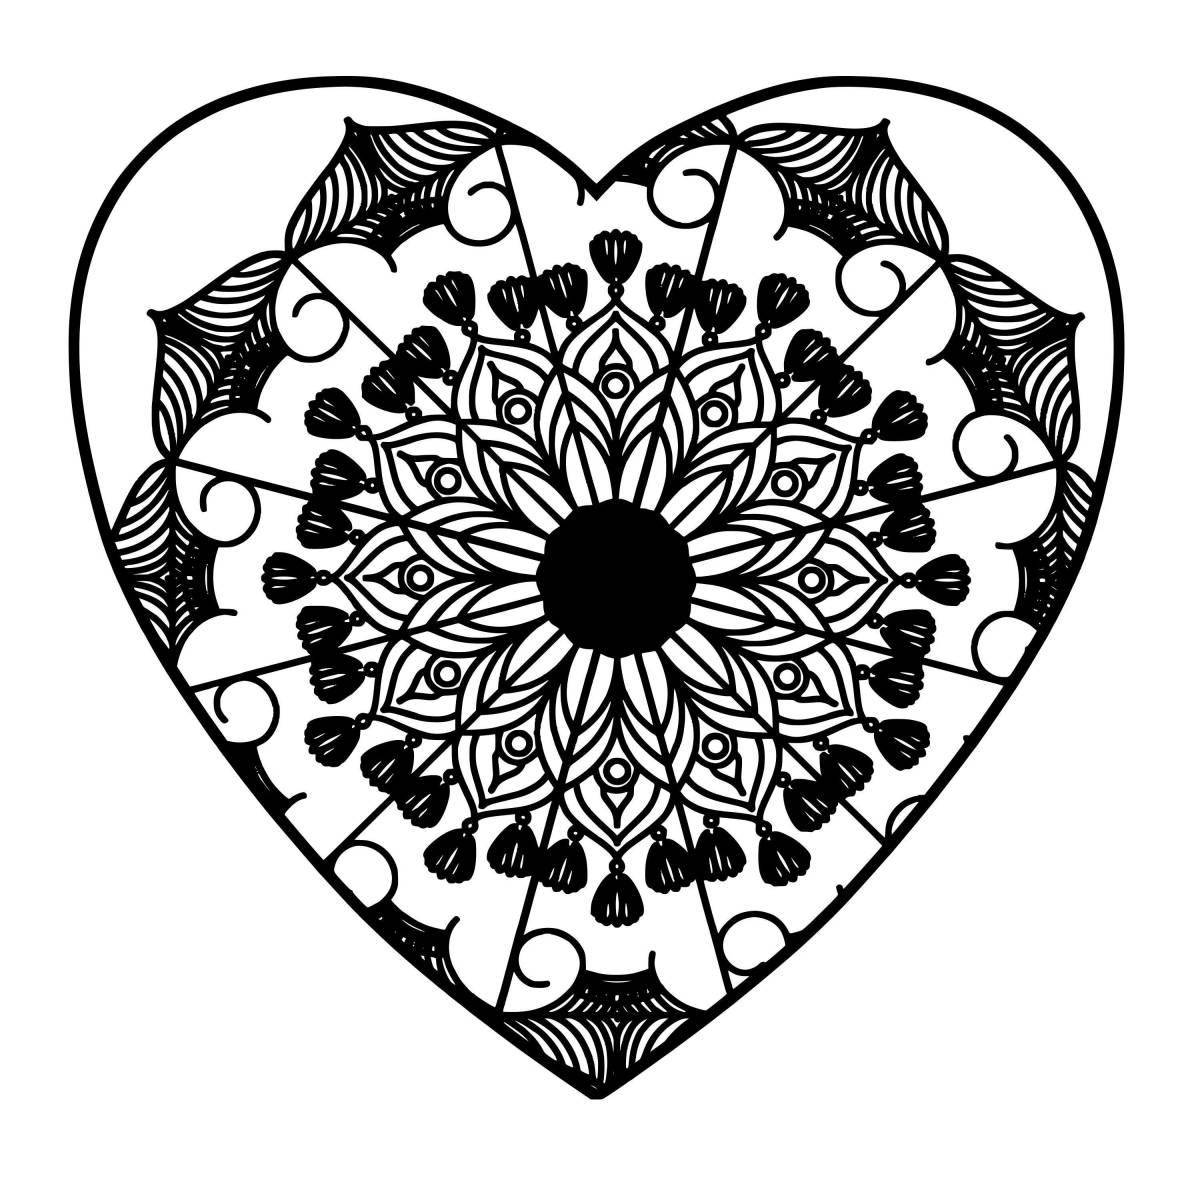 Fairy heart coloring book